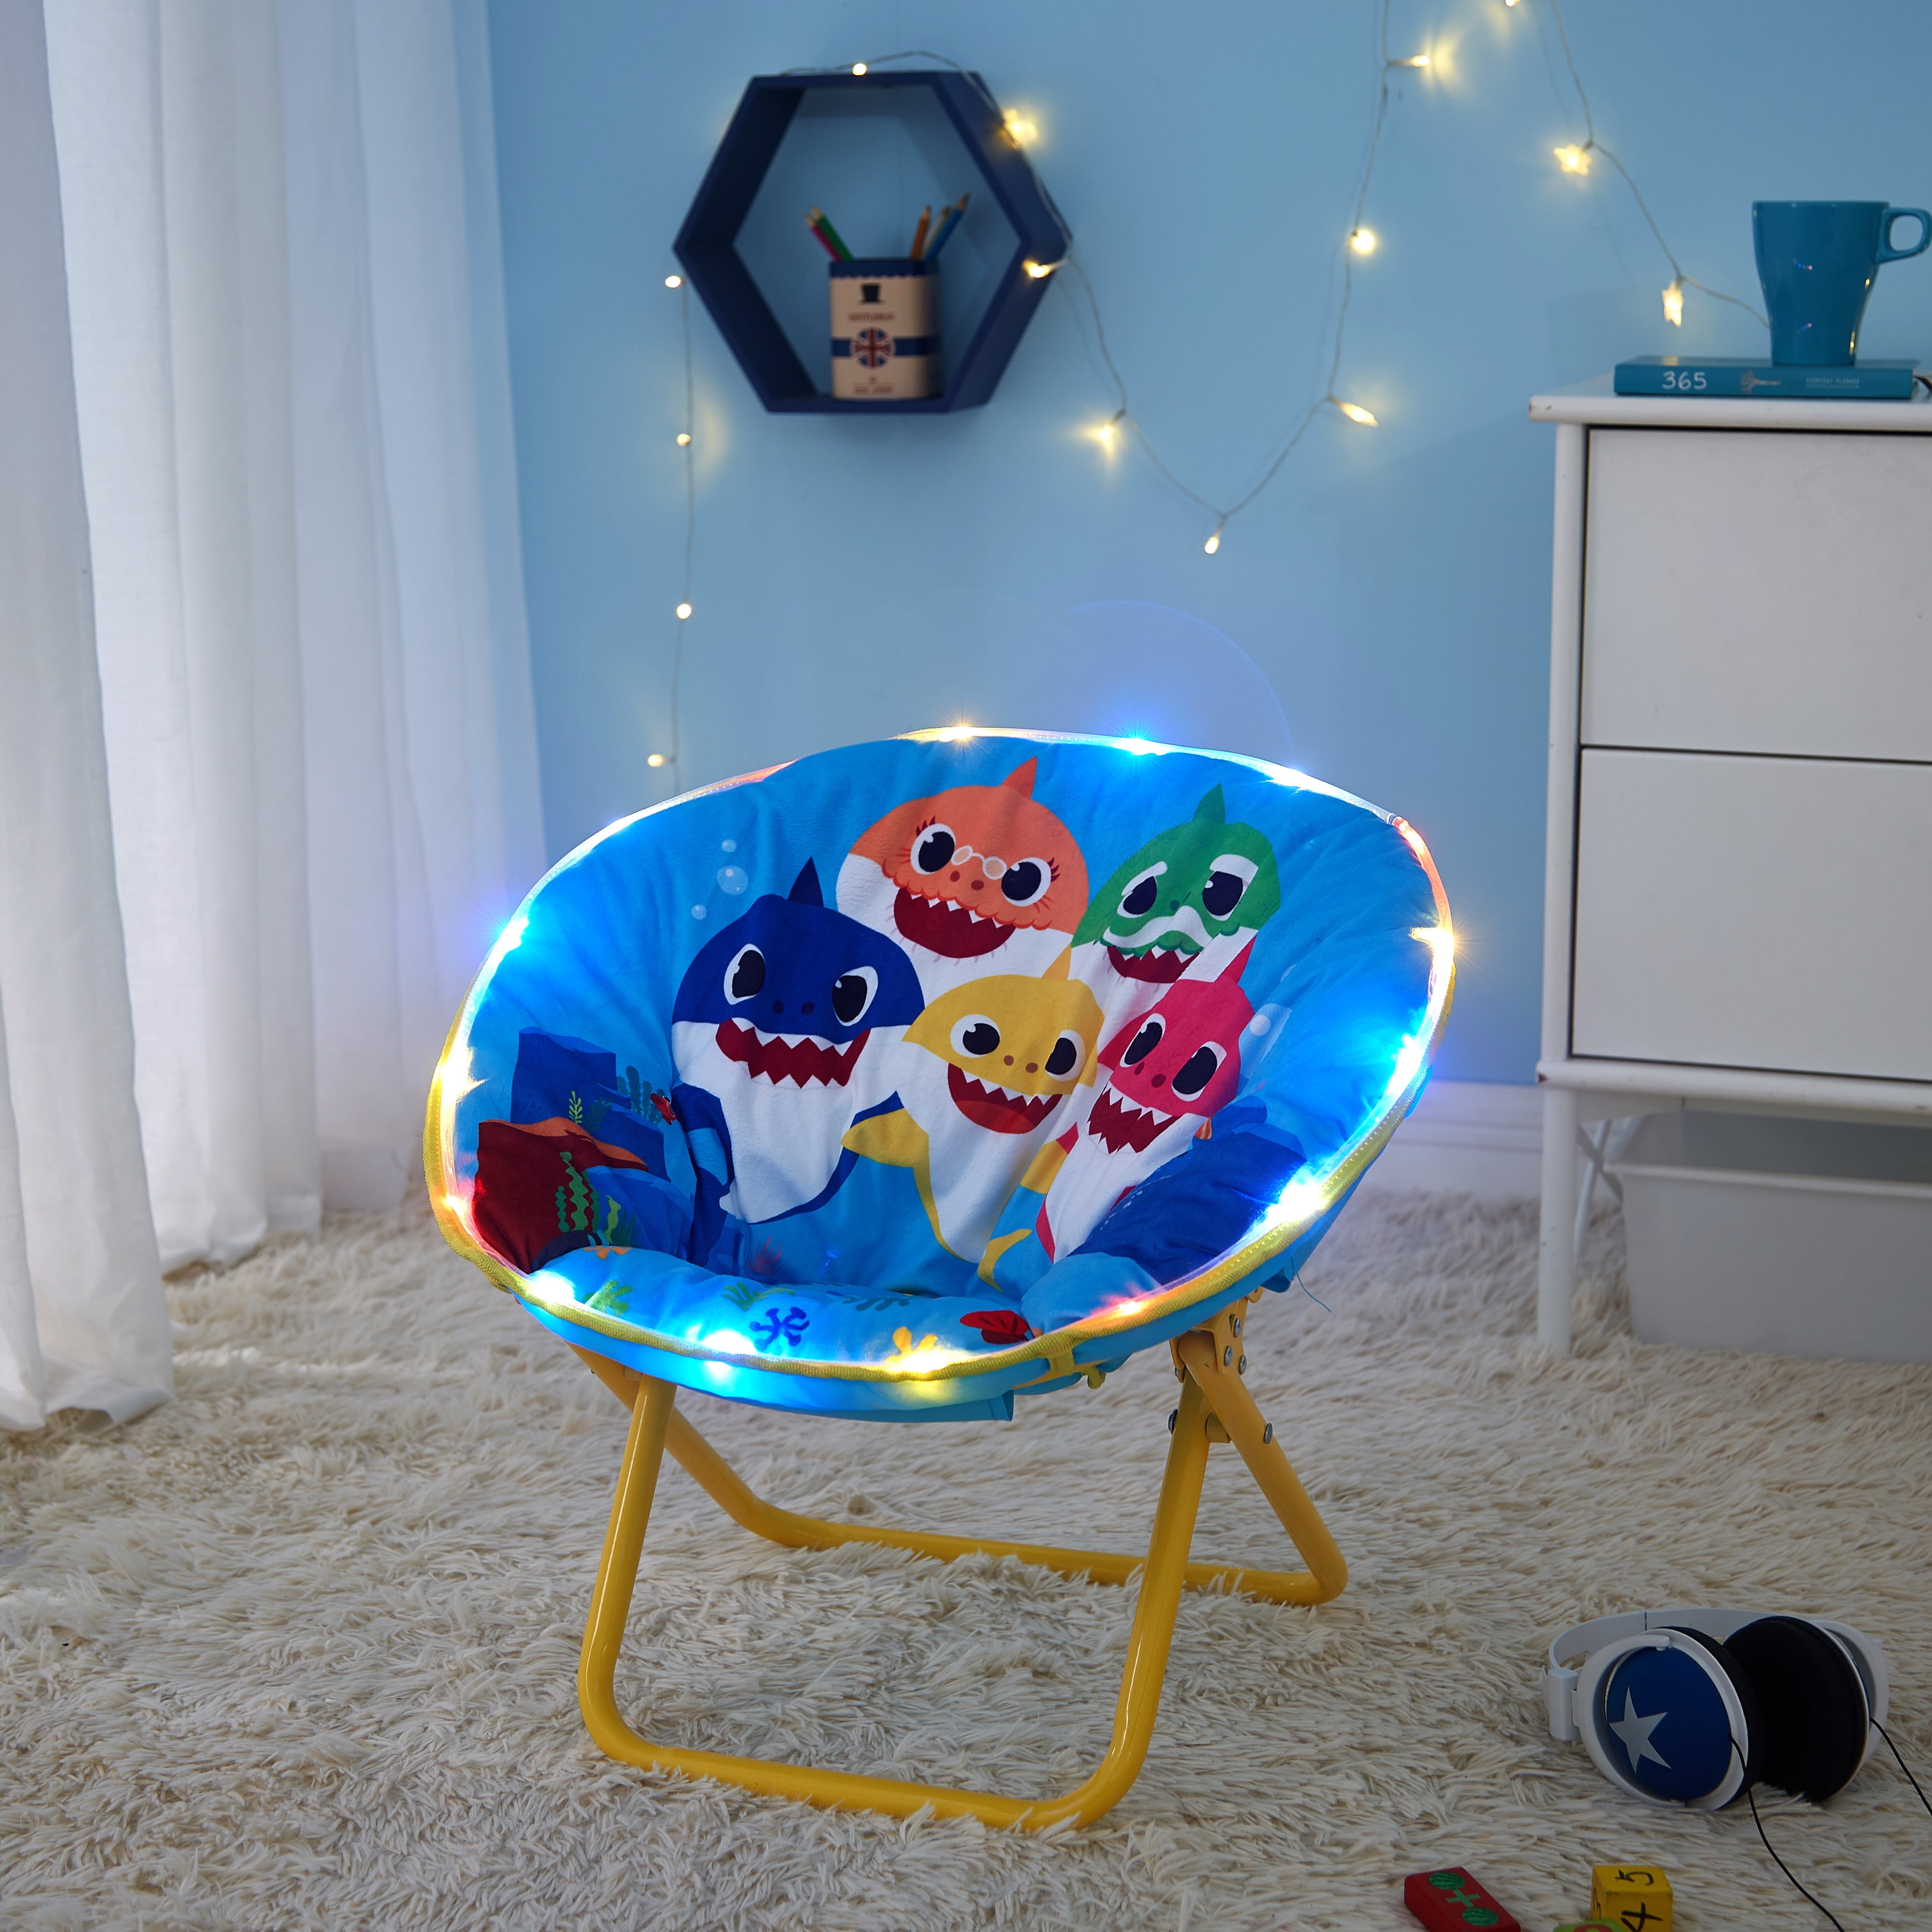 Baby Shark 19" Toddler, Polyester Saucer Chair with LED Lights